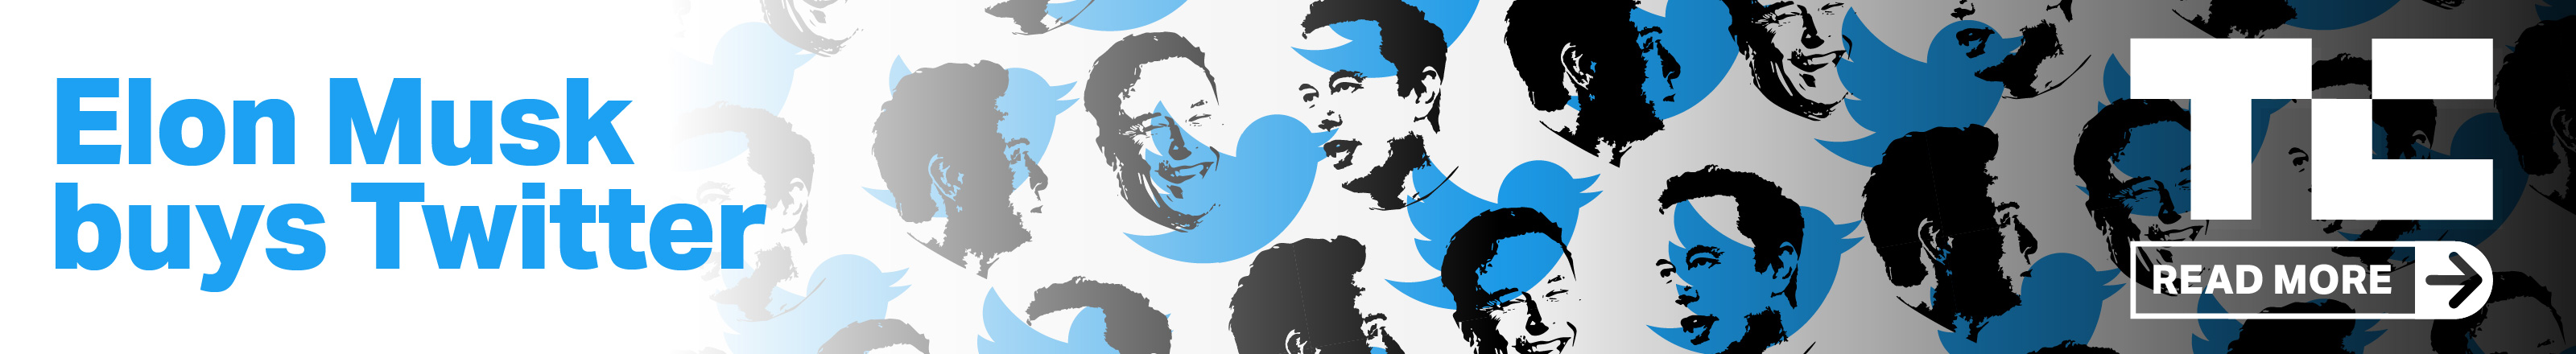 Read more about Elon Musk's purchase of Twitter on TechCrunch